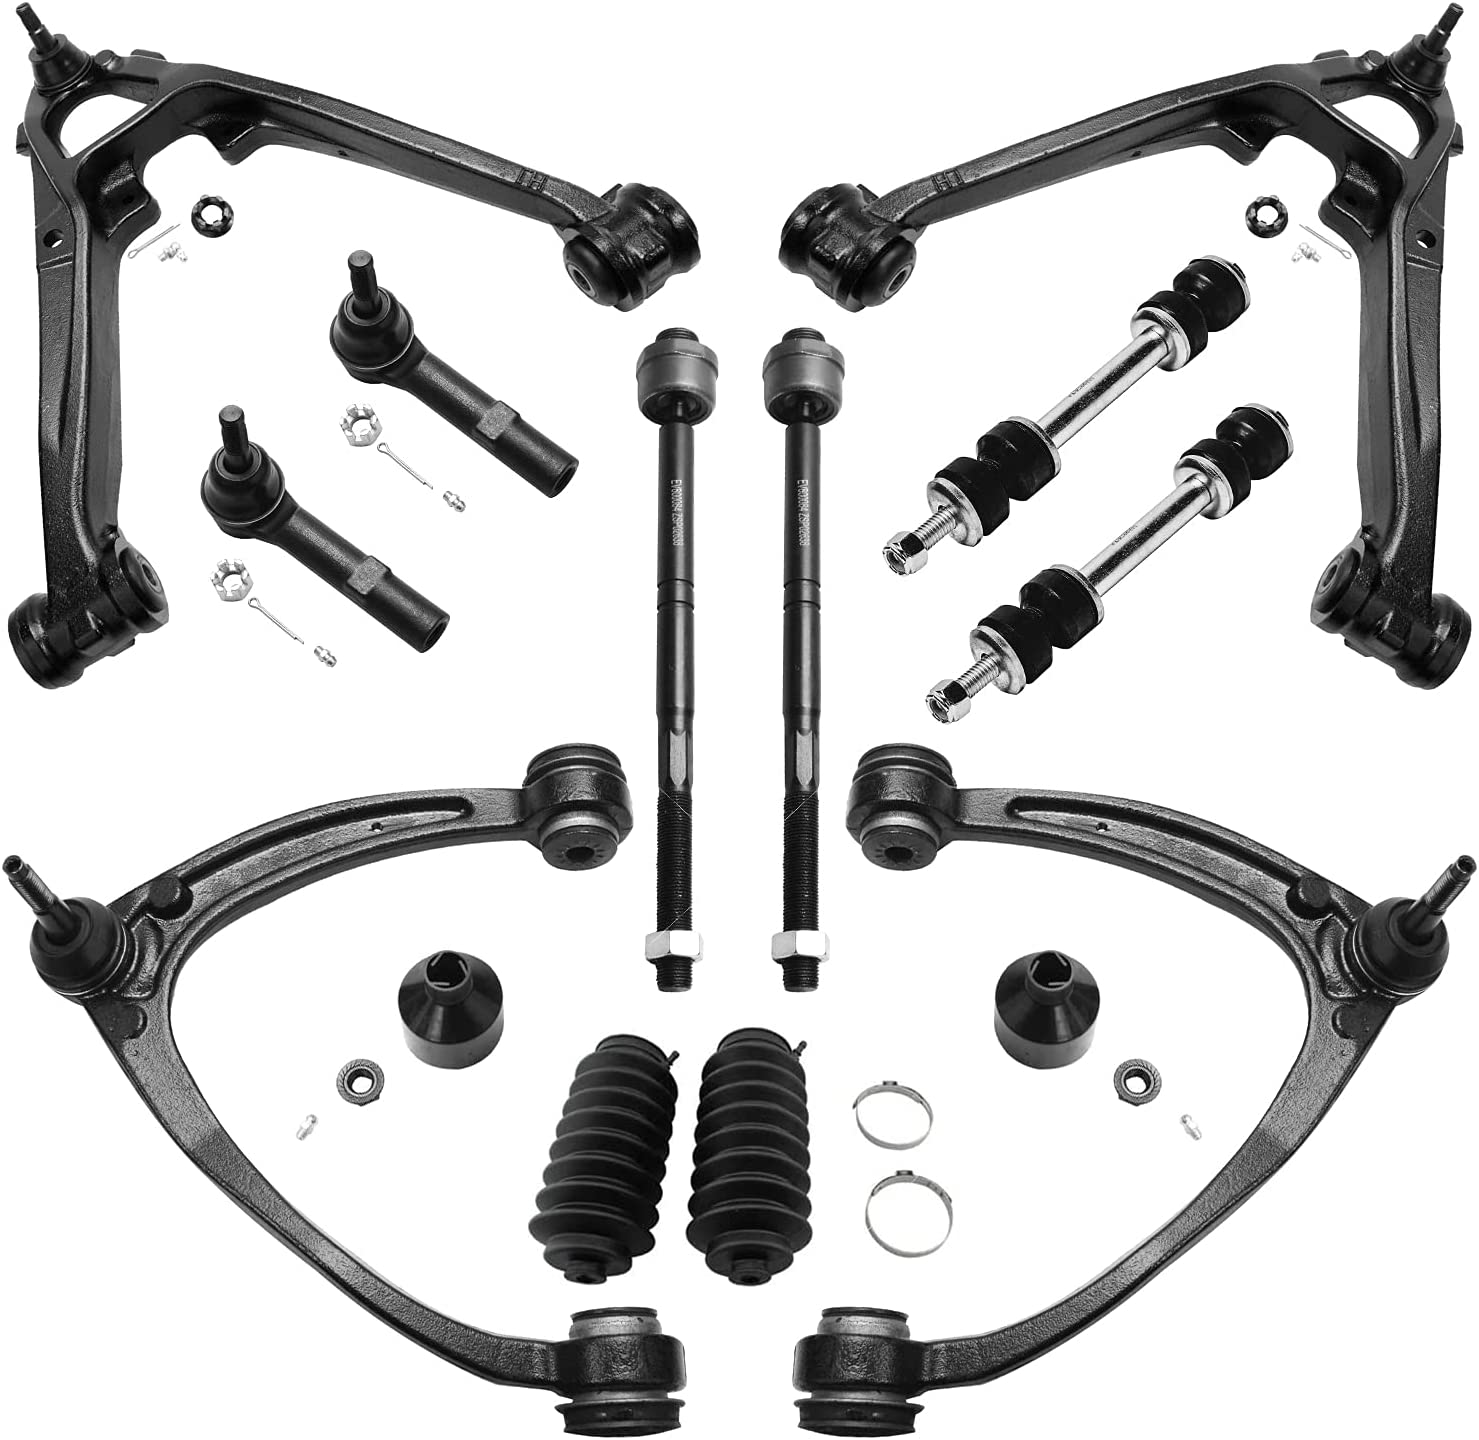 Why Choose LOOSOO Premium Suspension Steering Kit?  With our extensive selection of metal parts from bushings to front upper control arms, lower ball joints to shocks and struts, you can rest assured that picking the right suspension parts kit for your vehicle is made simple by LOOSOO Suspension.